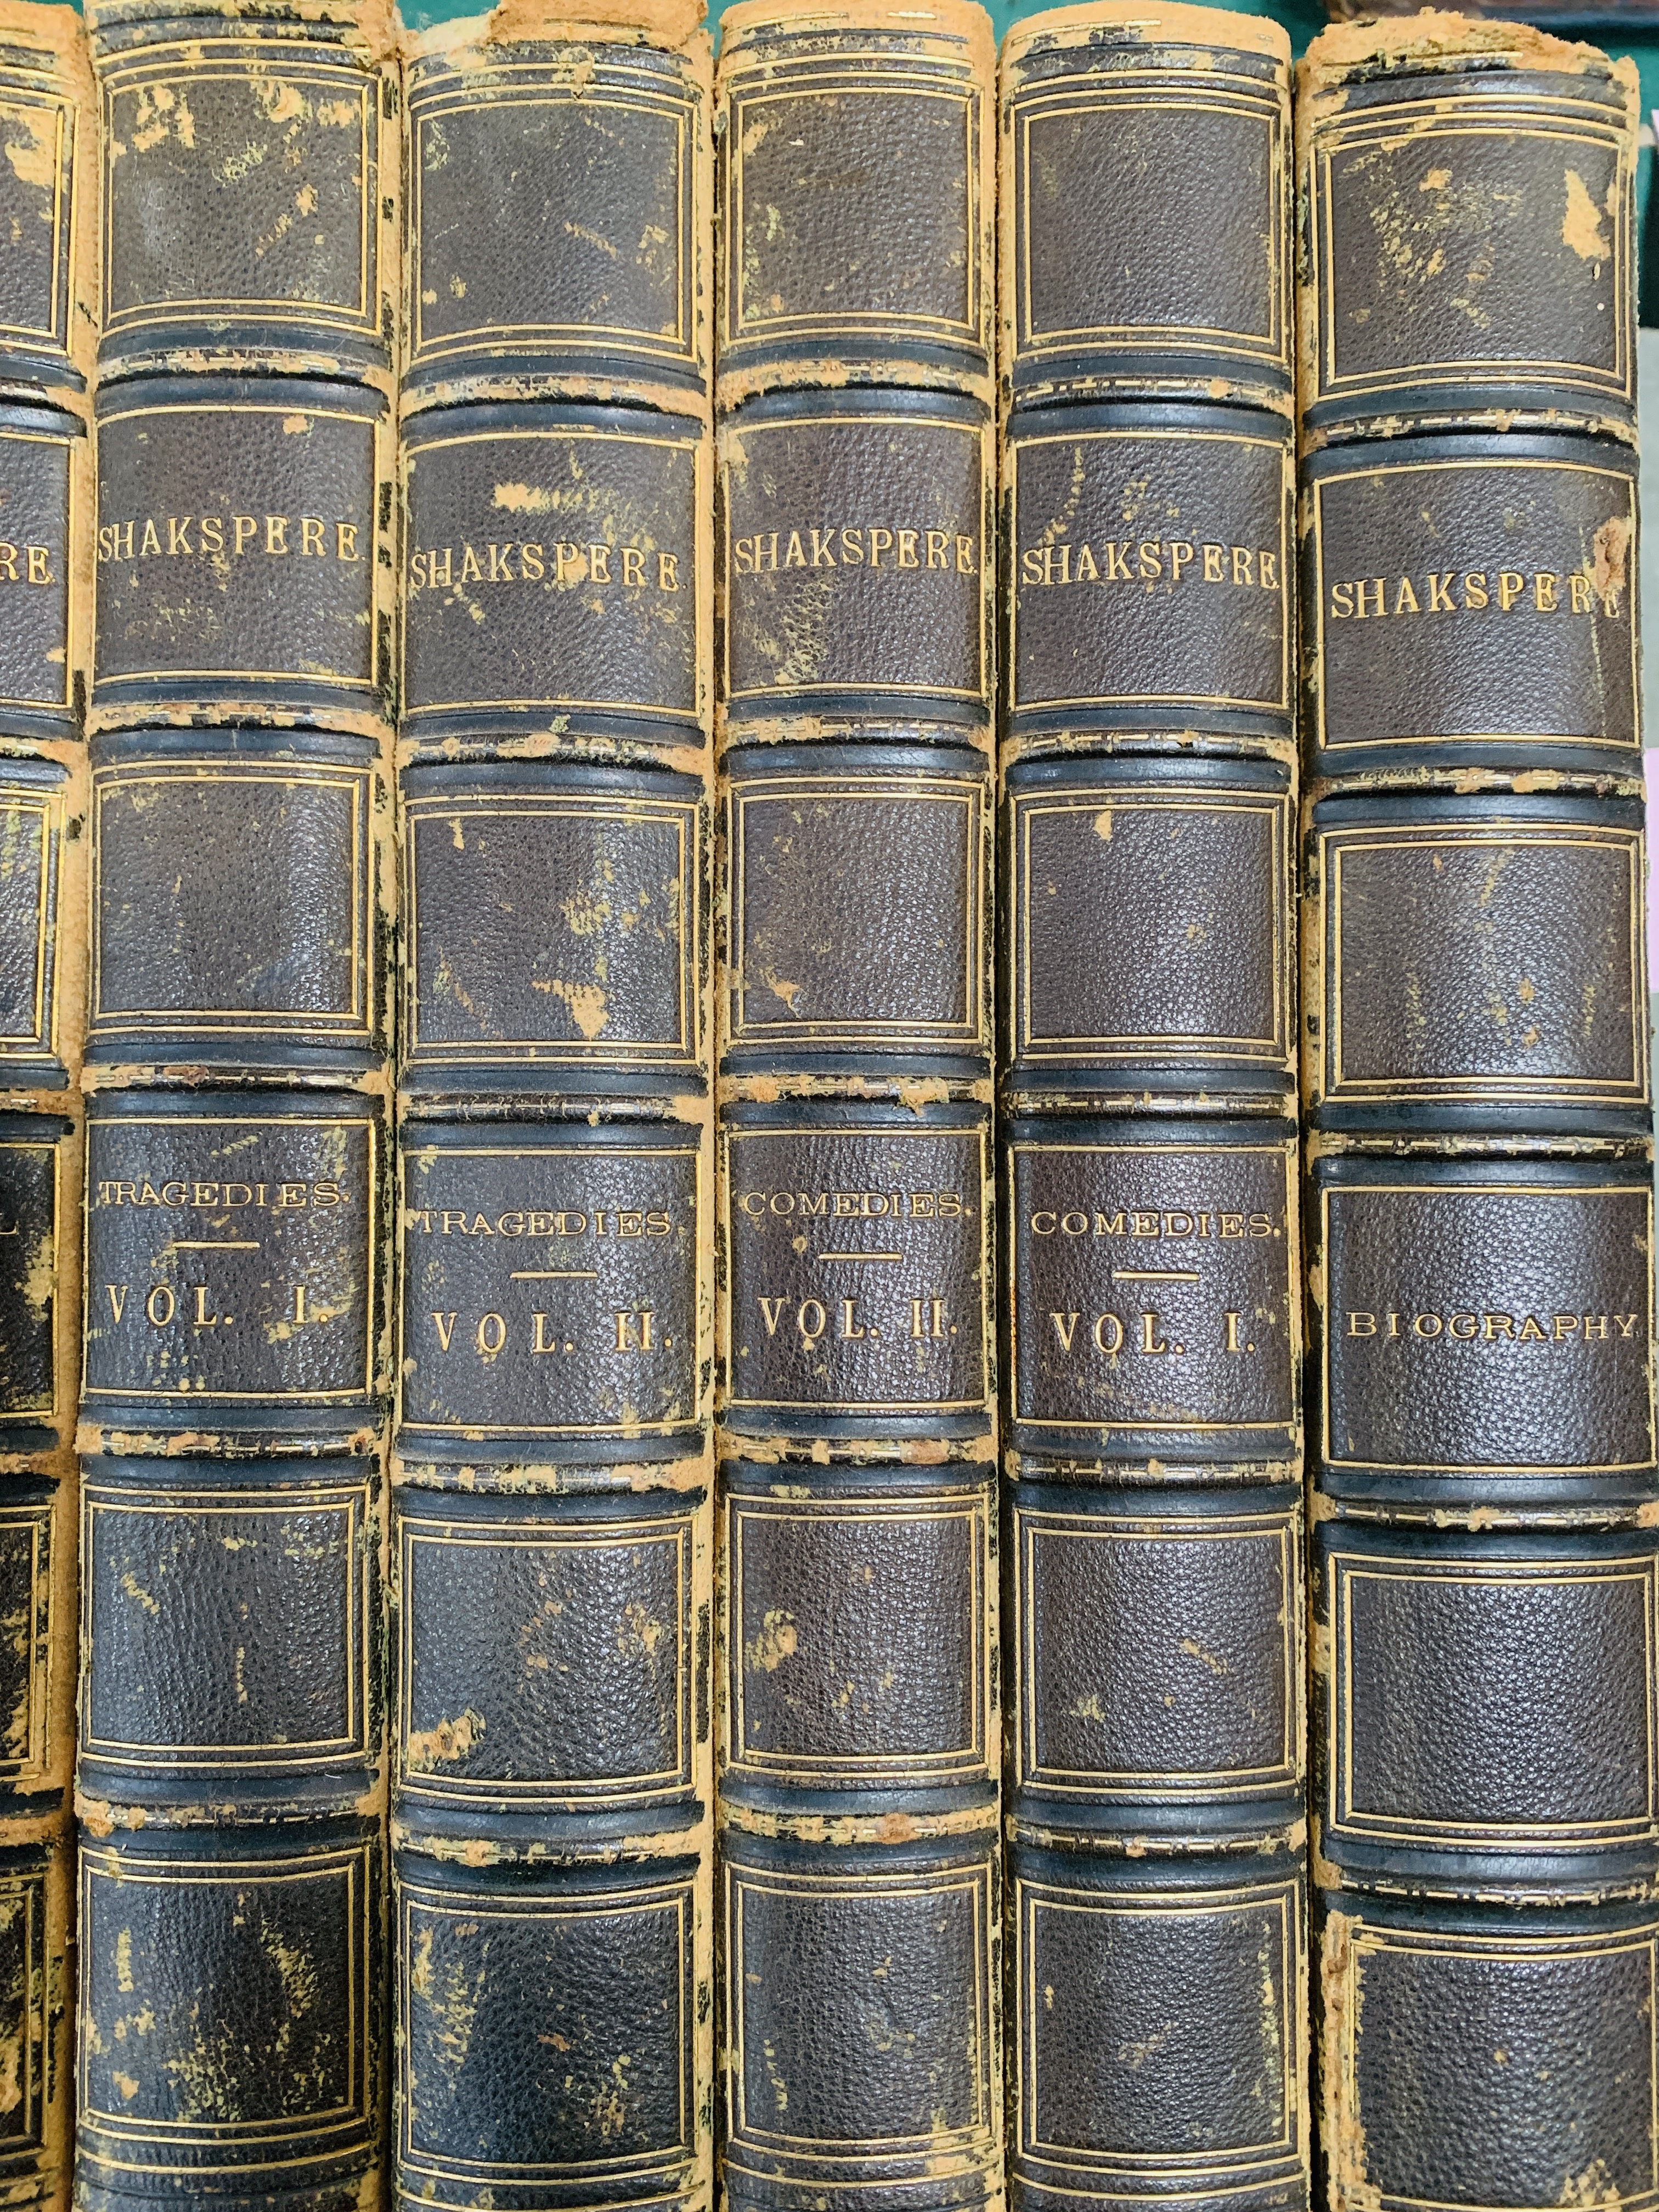 The Pictorial Edition of The Works of Shakspere, edited by Charles Knight, 8 volumes, 1867